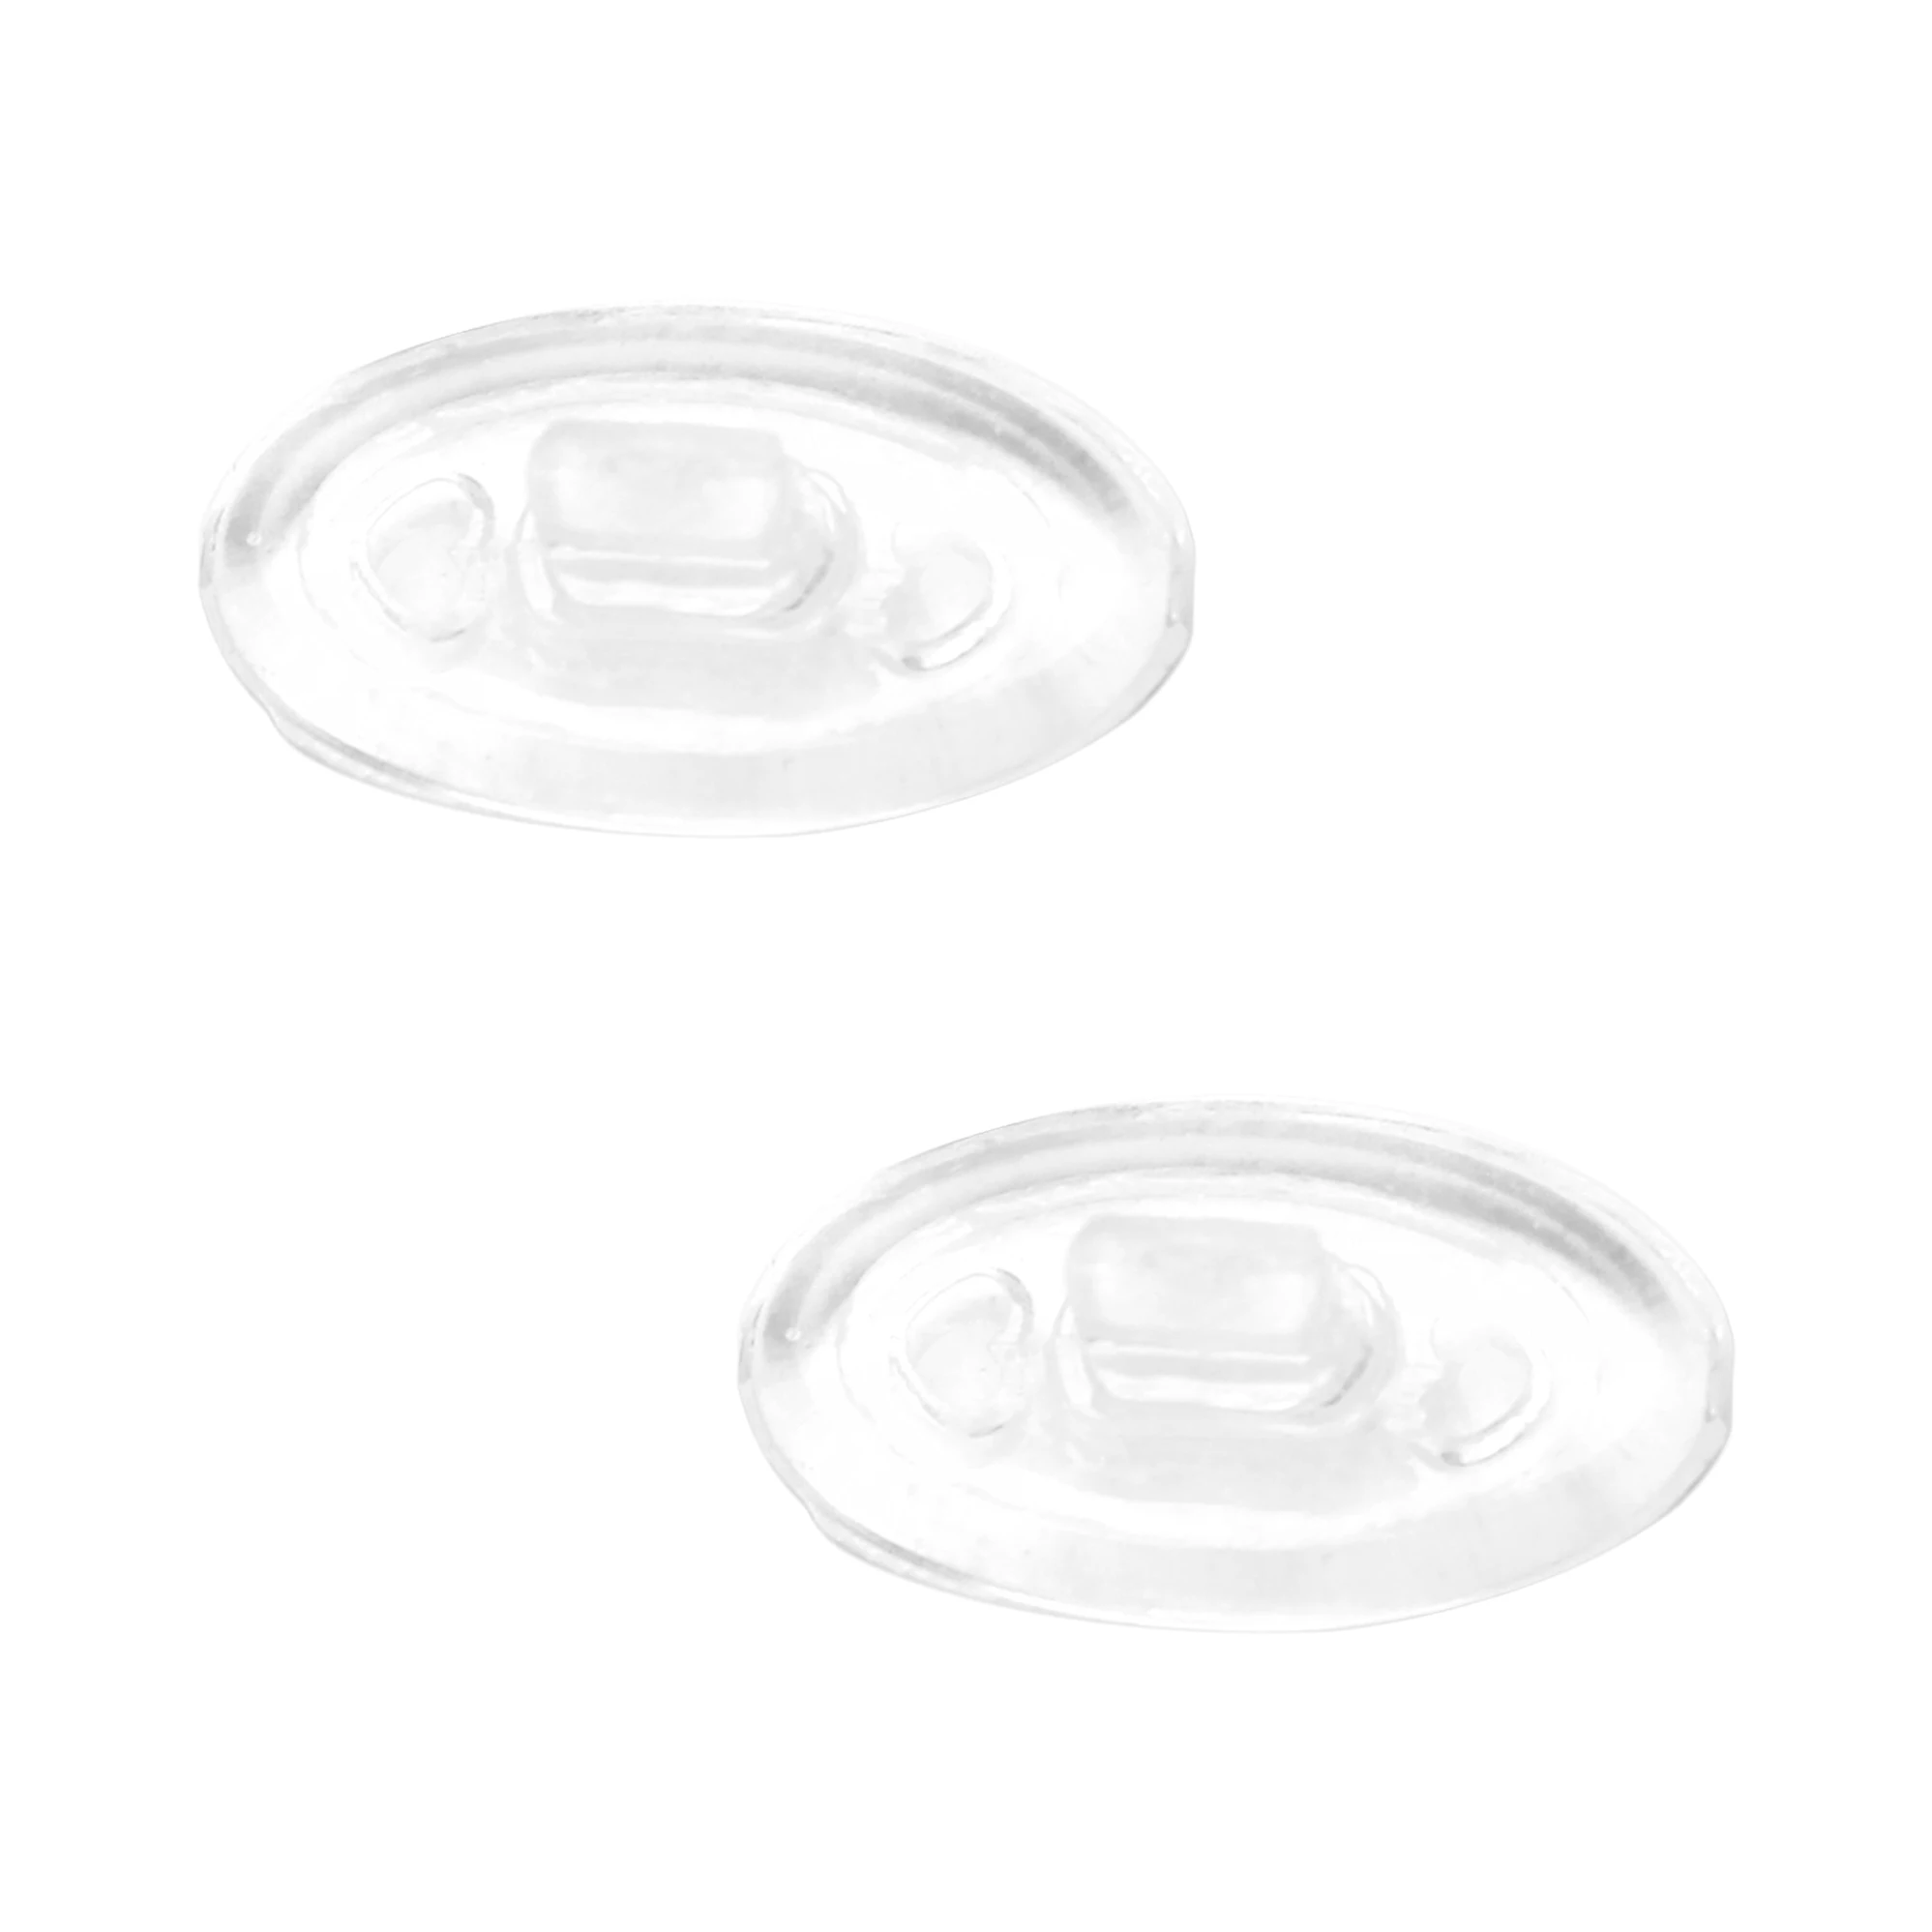 

TenDye Replacement Clear Nose Pads for Oakley Tightrope OO4040 Sunglasses, Push-on Snap-in Nose Piece